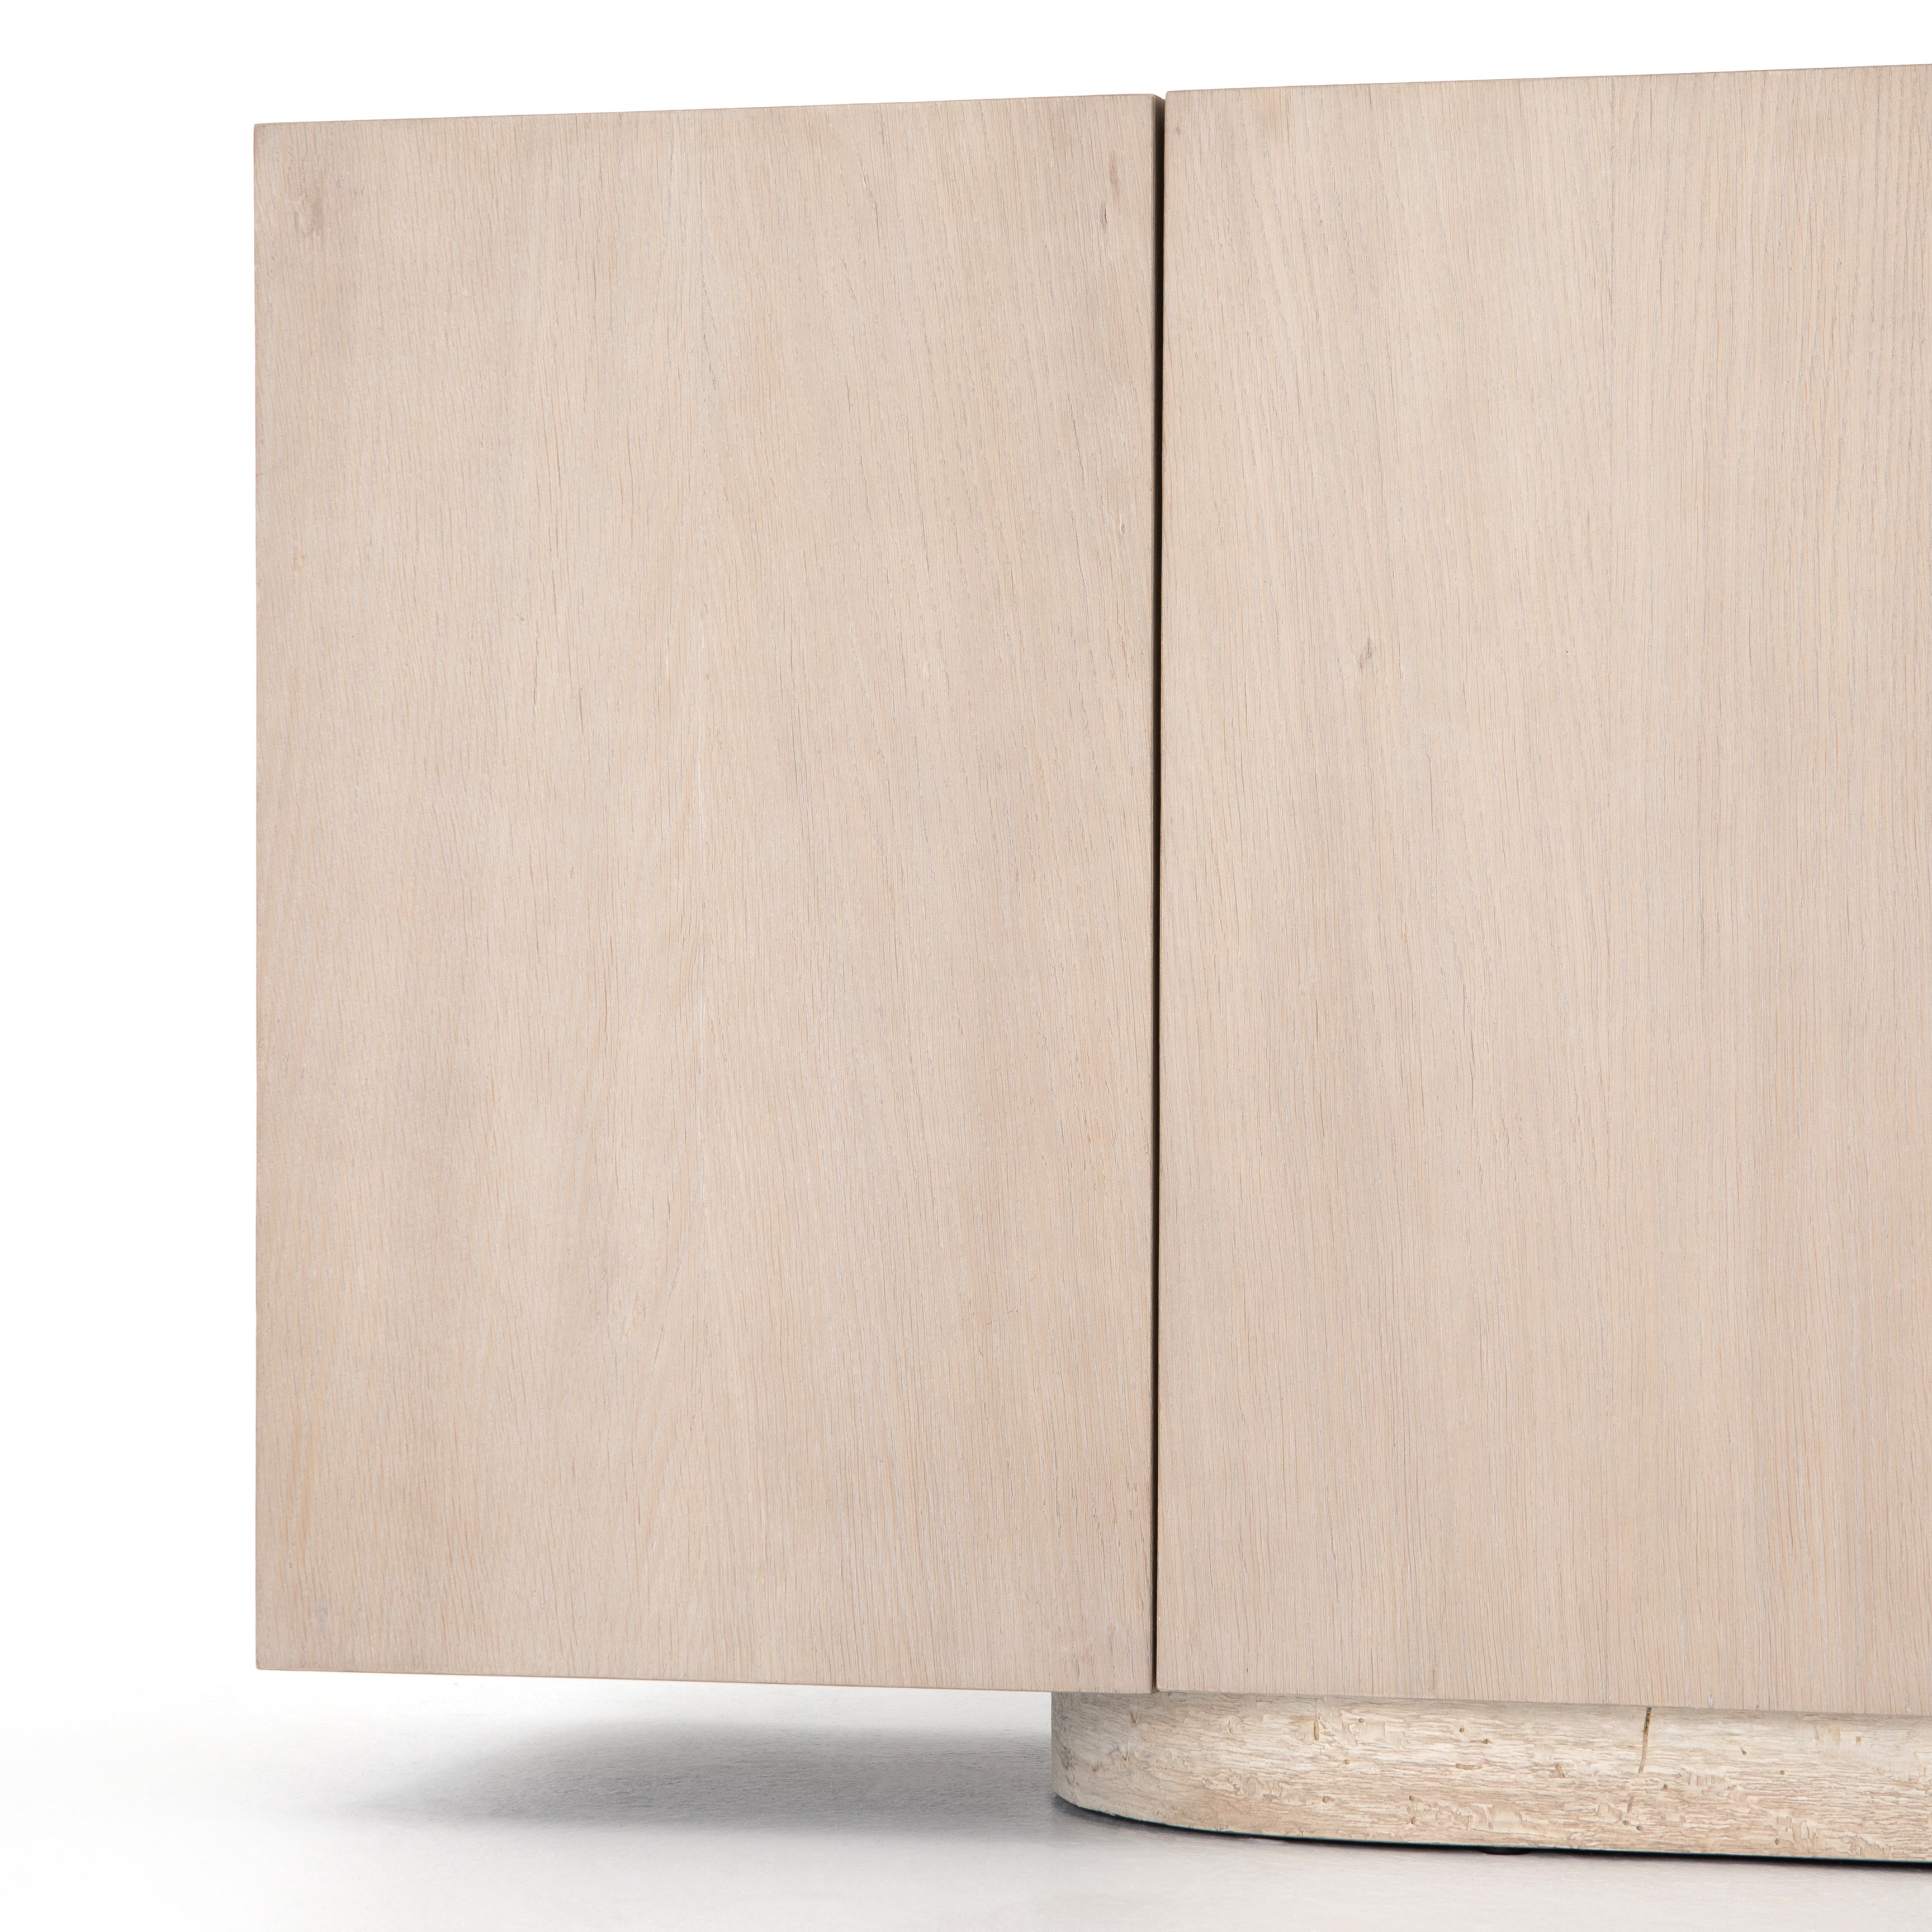 We love the asymmetic look of this Liv Sideboard - Pale Oak Veneer.  Push-latch doors open to partitioned spaces offering plenty of interior storage with removable adjustable shelves, plus rear cutouts for cord management.  Overall Dimensions: 74.00"w x 17.50"d x 31.00"h